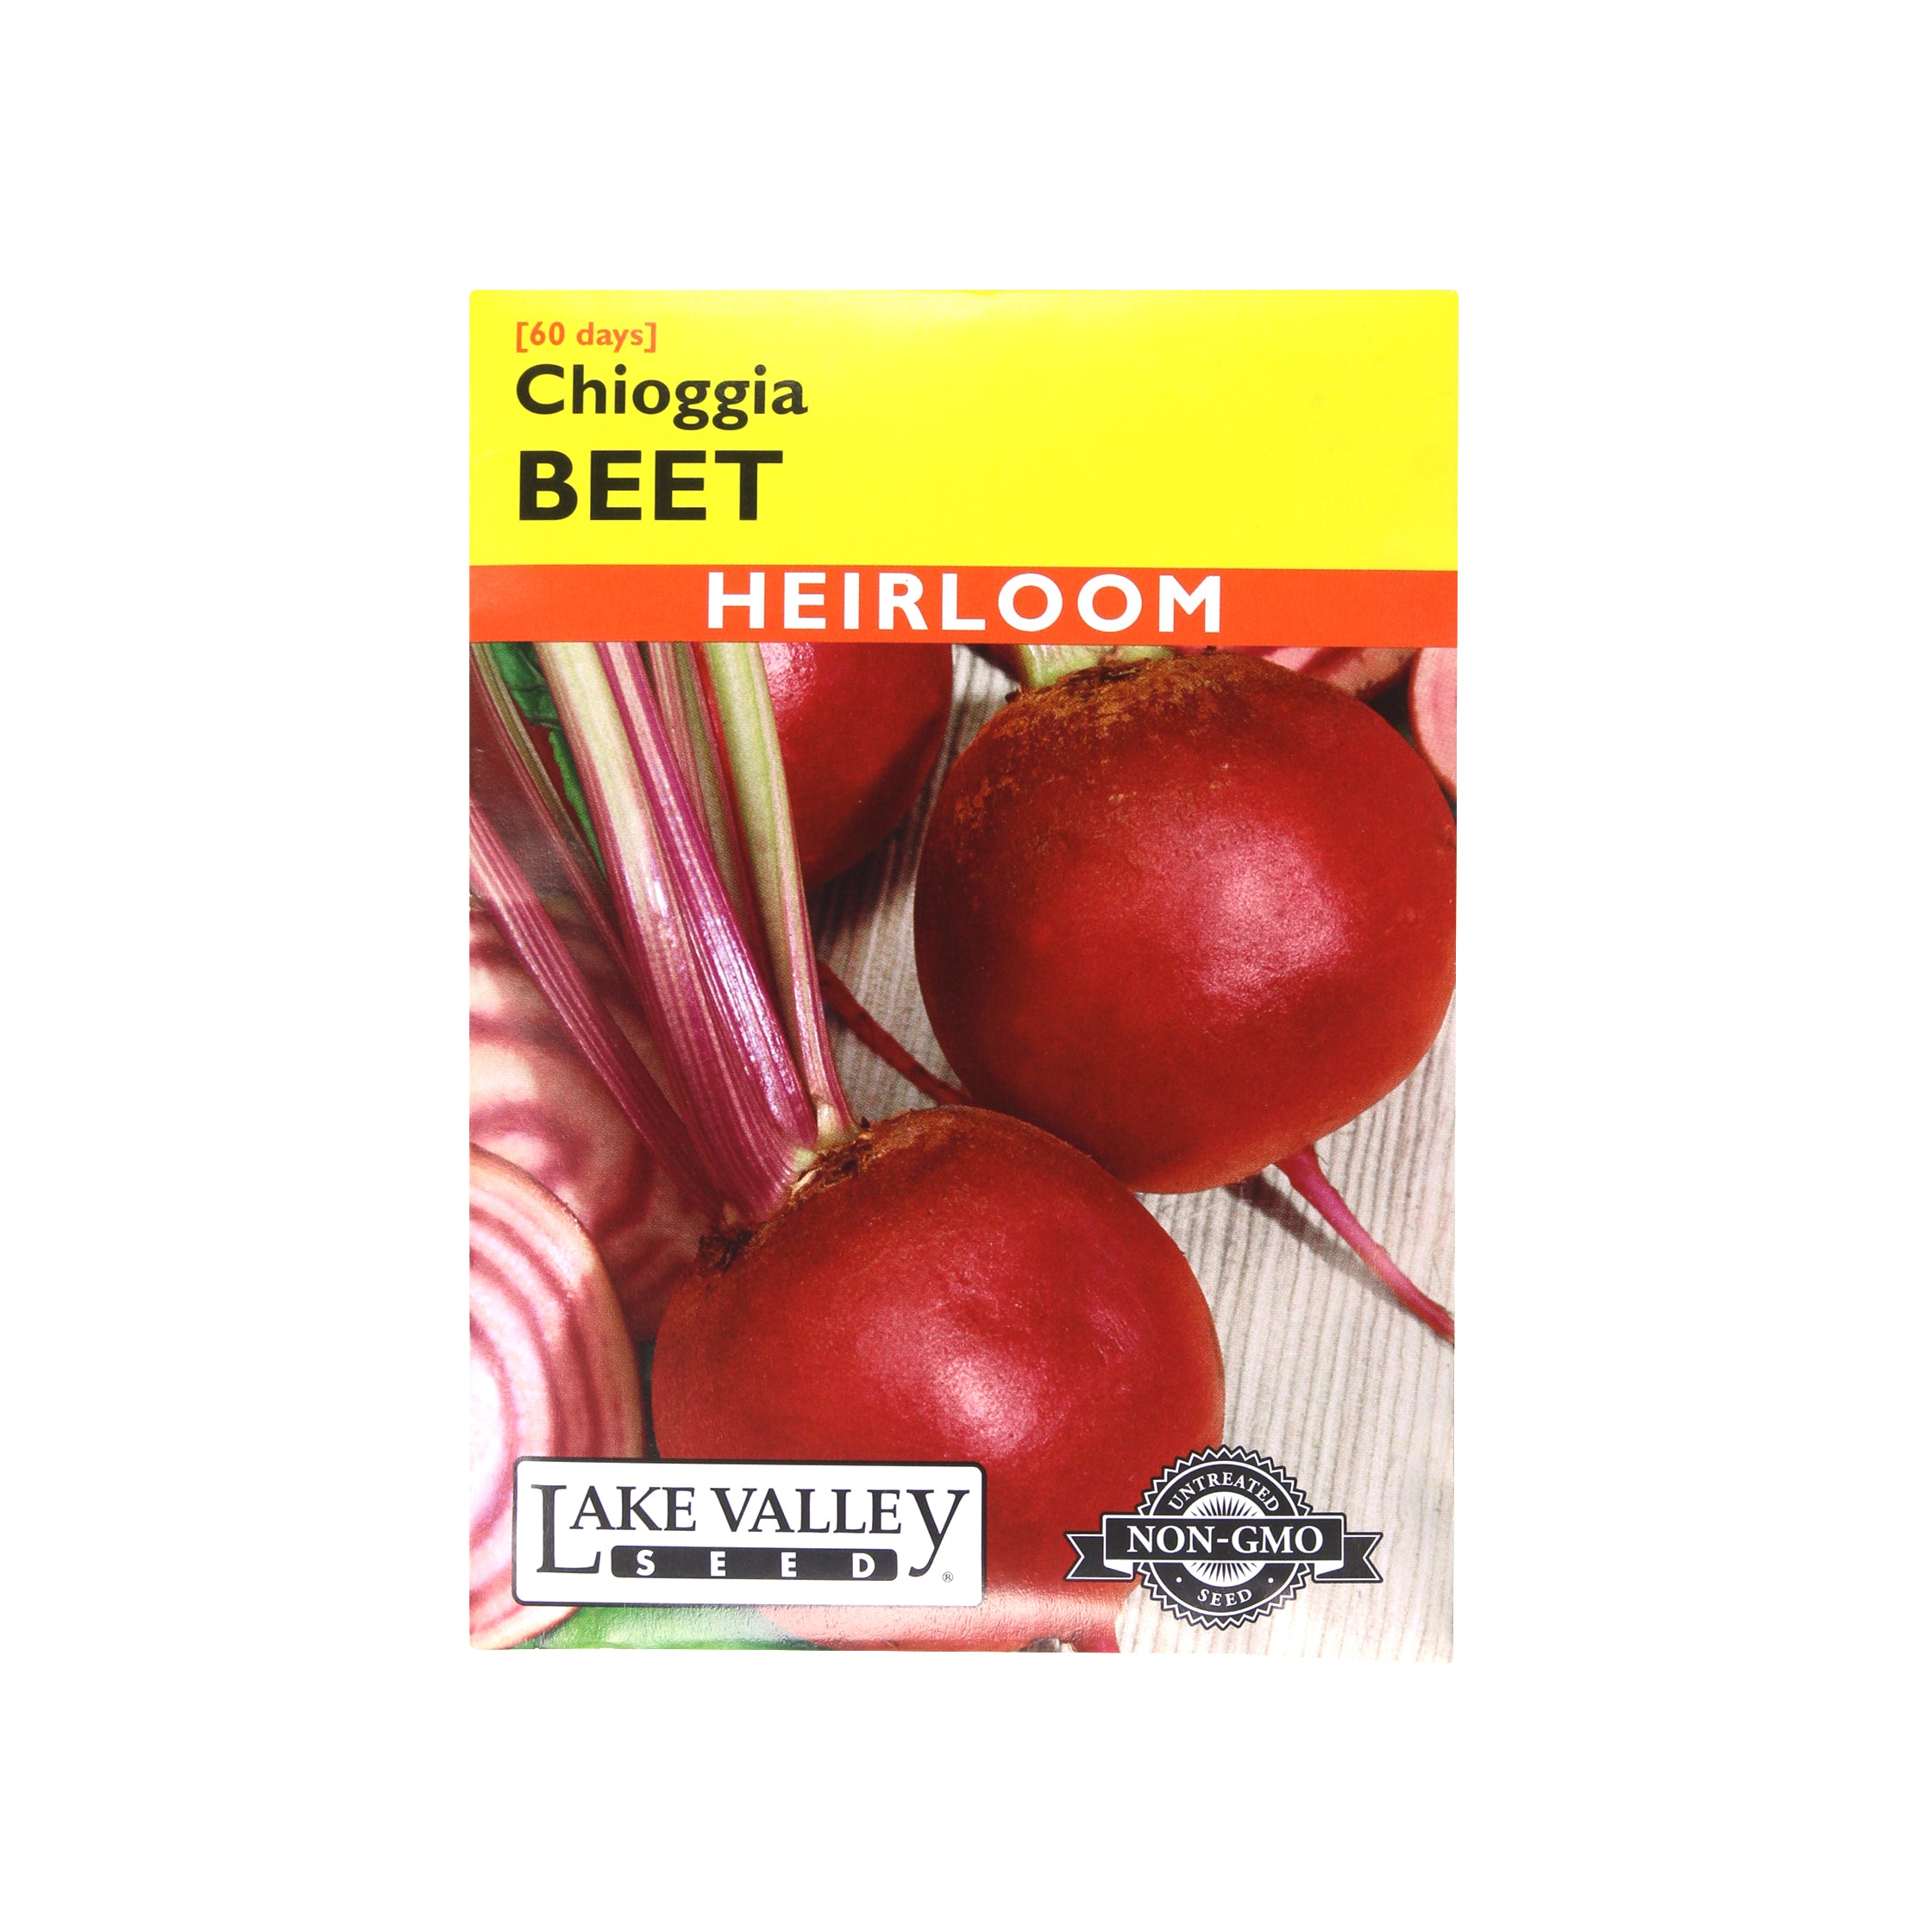 Lake Valley Seed Chioggia Beet, 2g